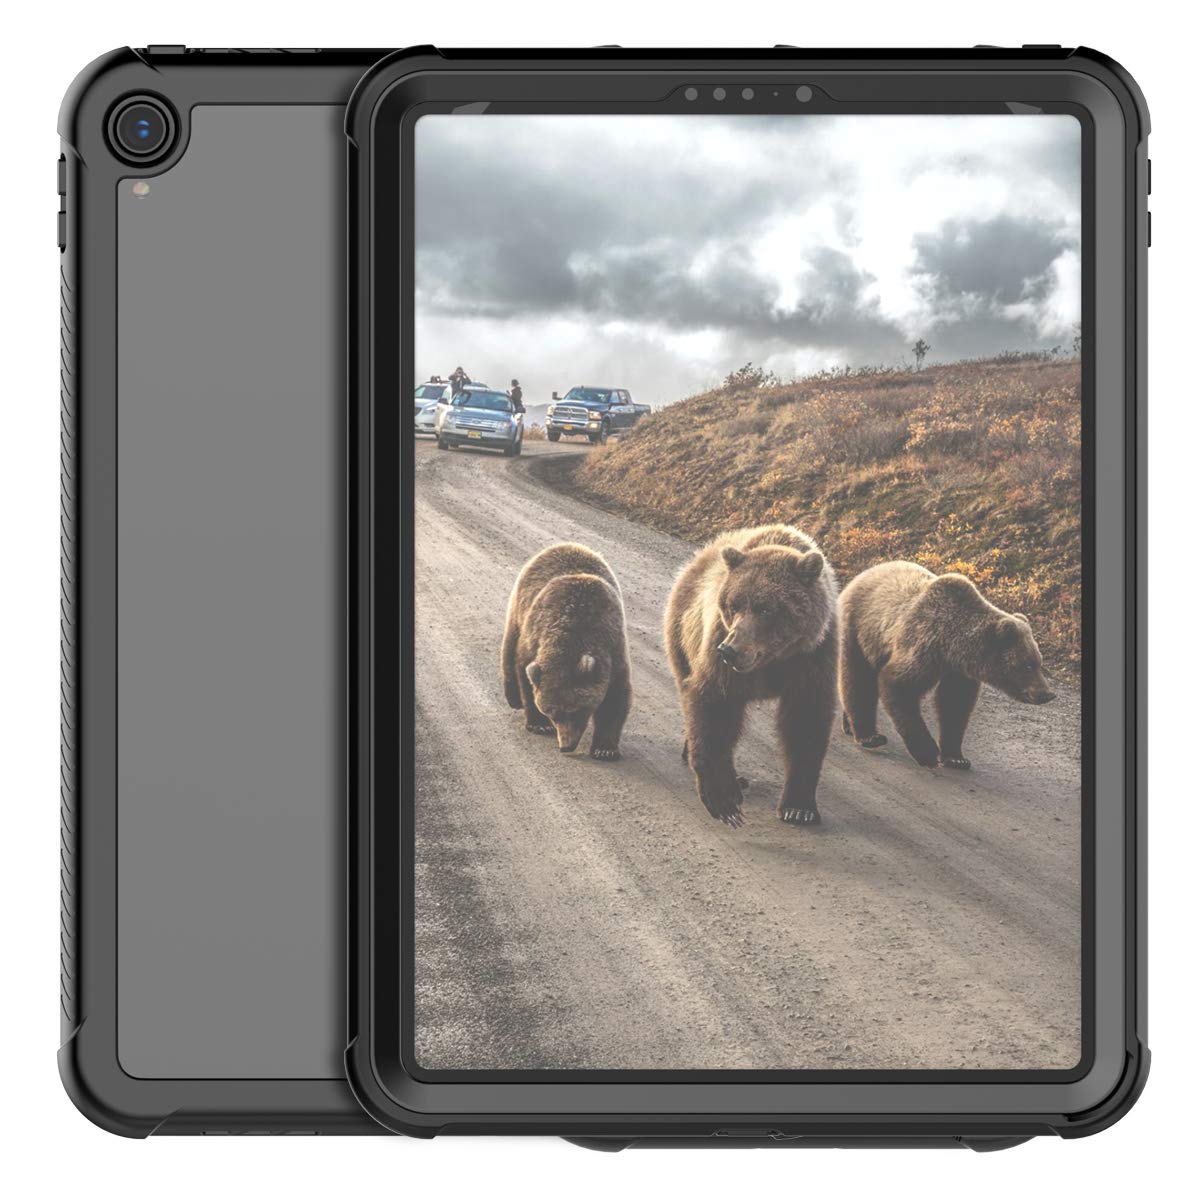 OAKTREE iPad Pro 11 inch (2018) Rugged Case with Built-in Screen Protector